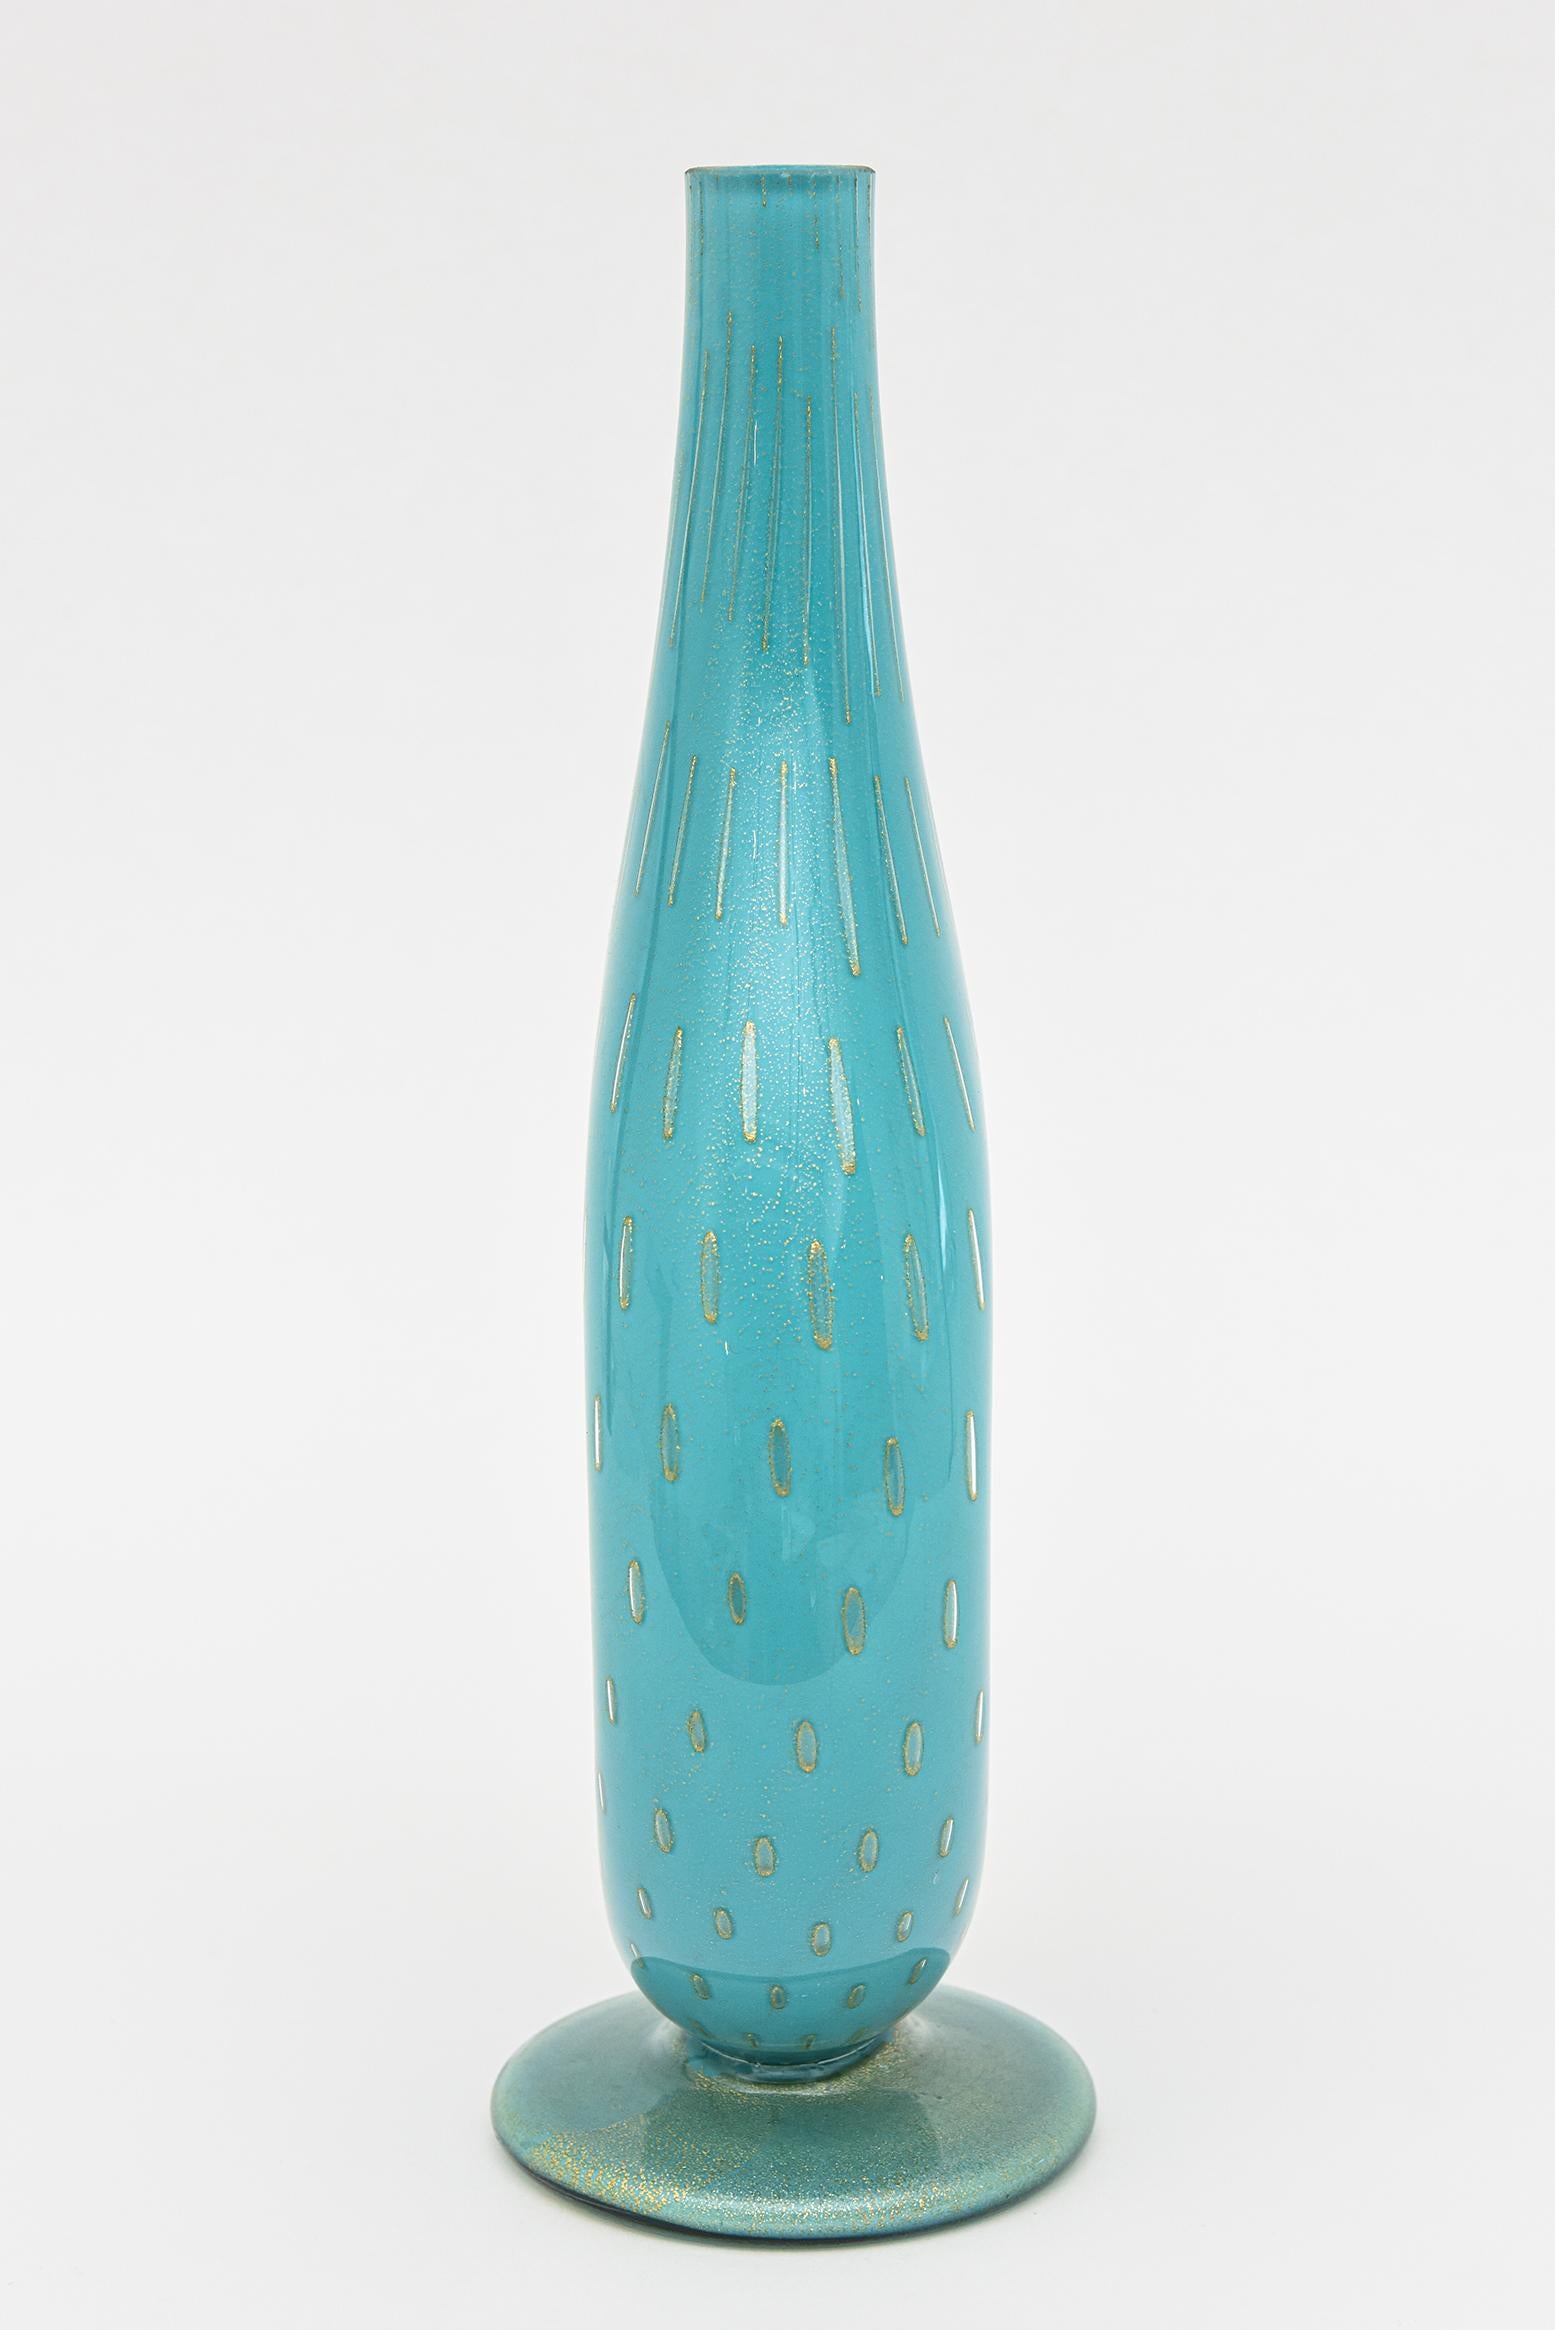 Vintage Barovier e Toso Murano Turquoise Glass Vessel Bottle With Gold Droplets For Sale 1